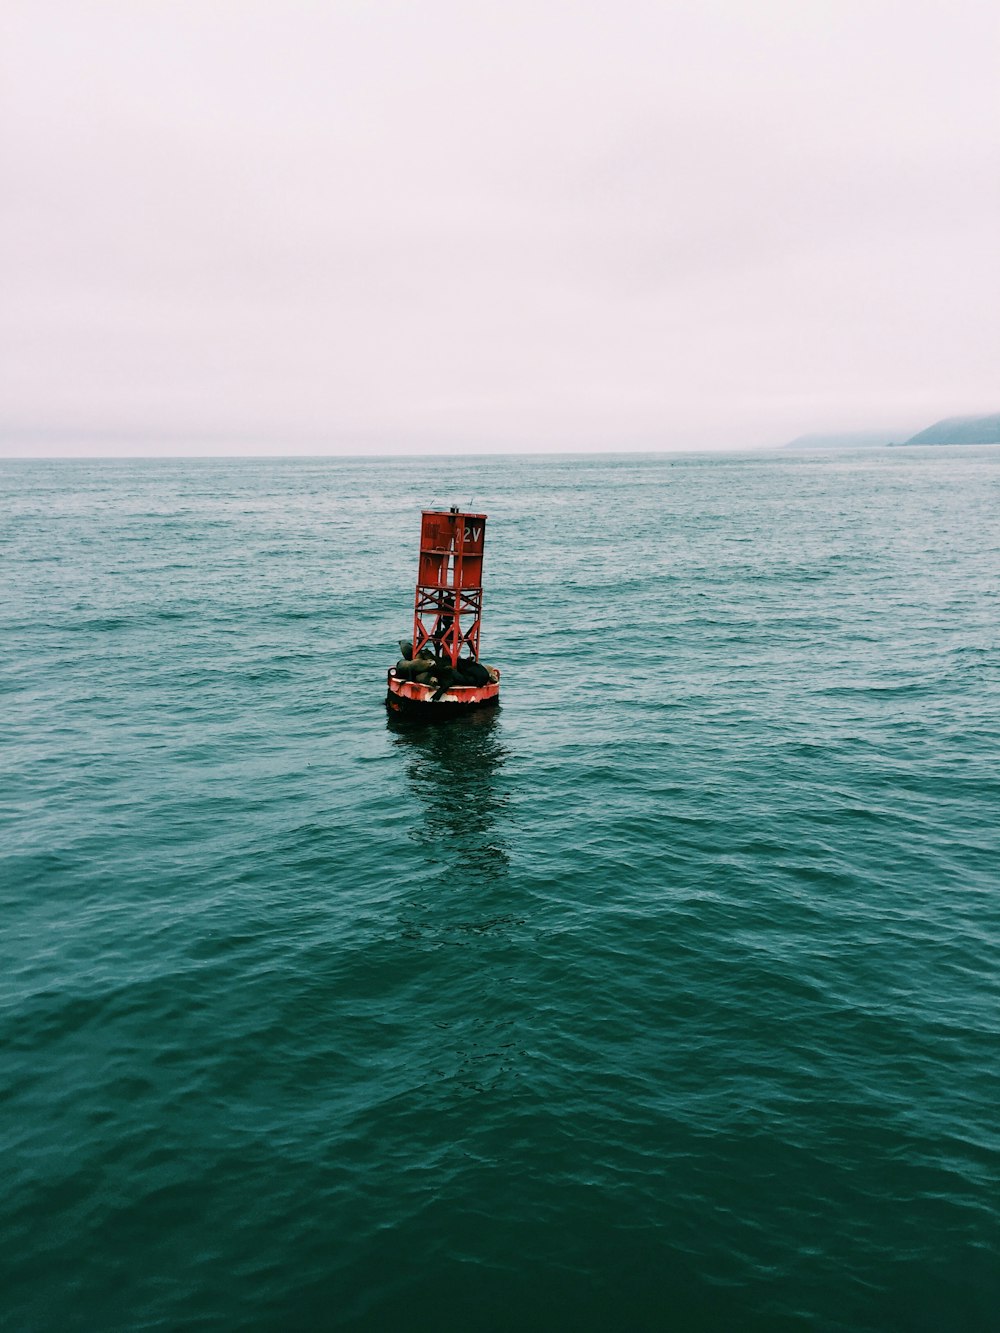 red buoy on body of water